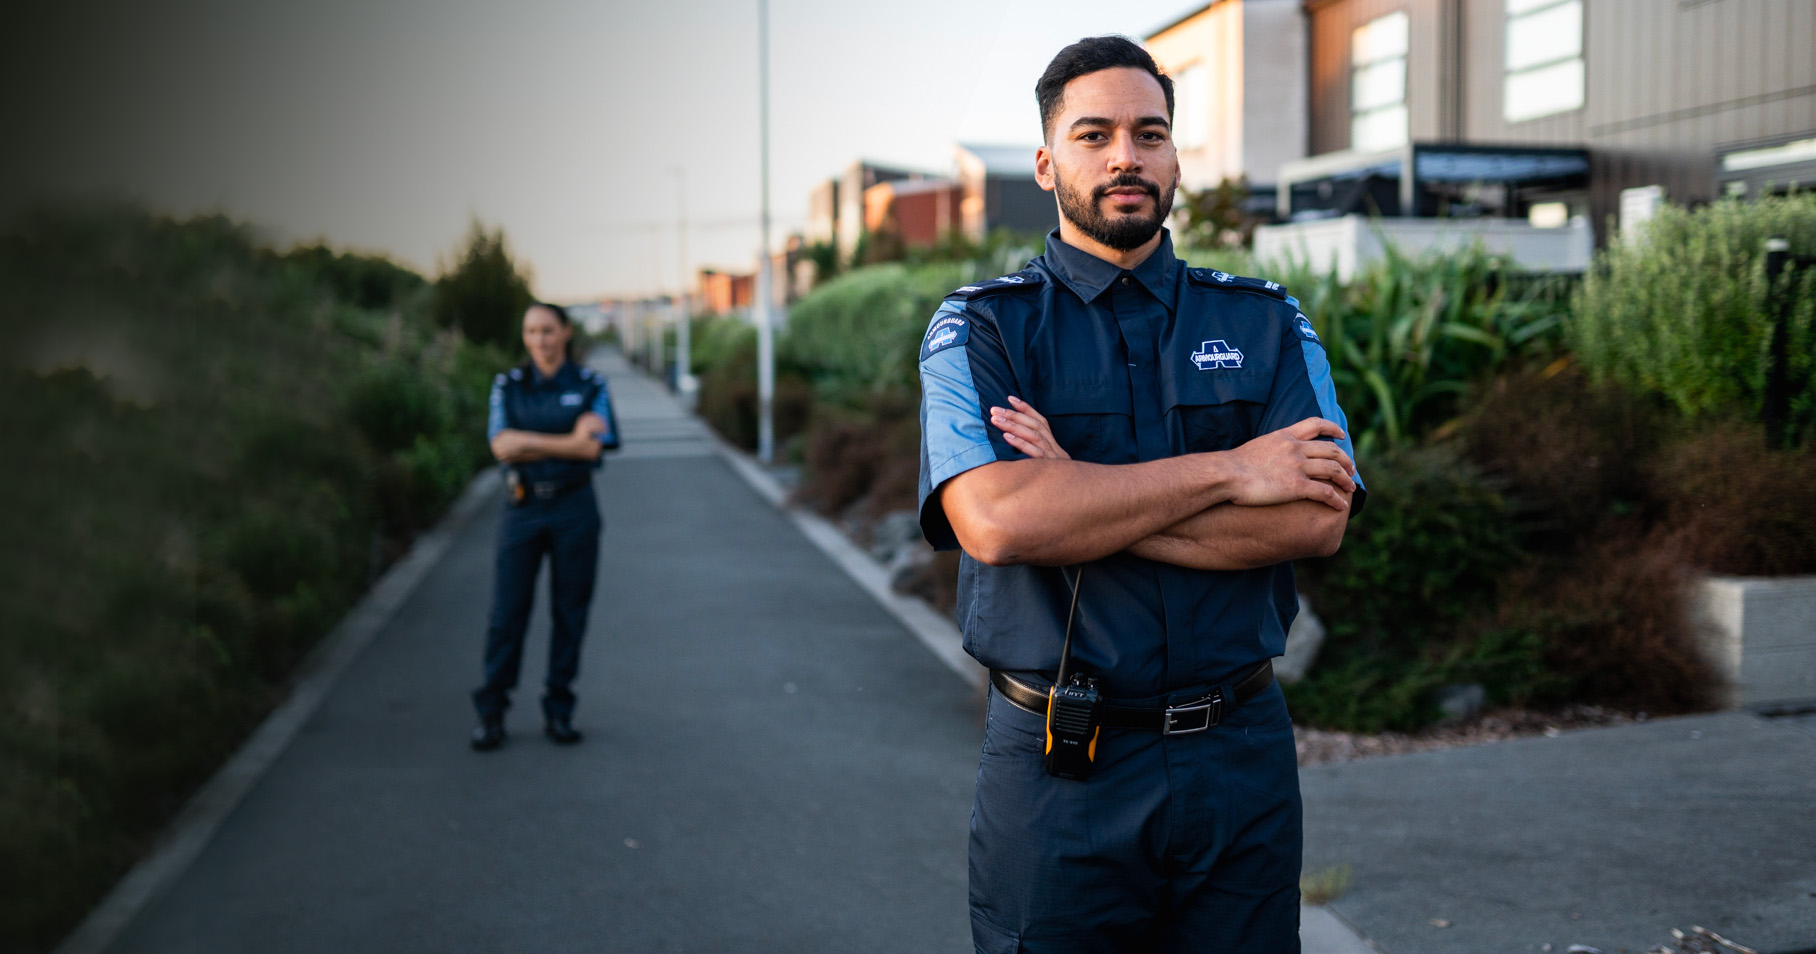 Two security guards with arms folded